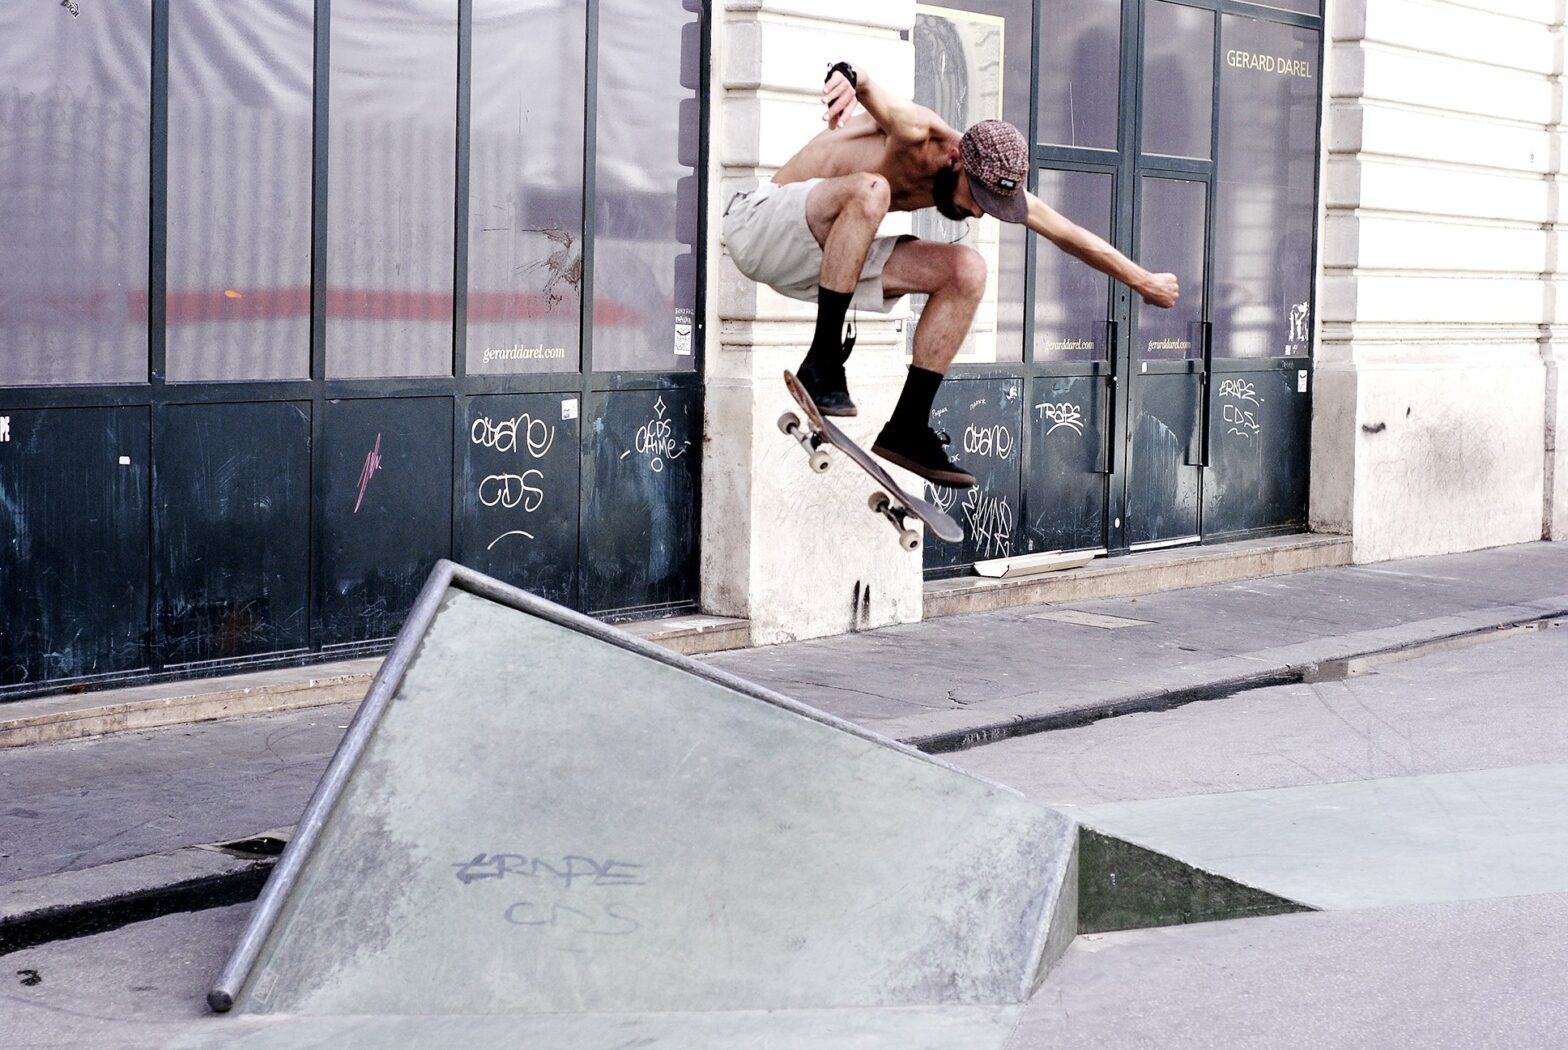 Picture of me jumping in the Cladel skatepark in Paris, France